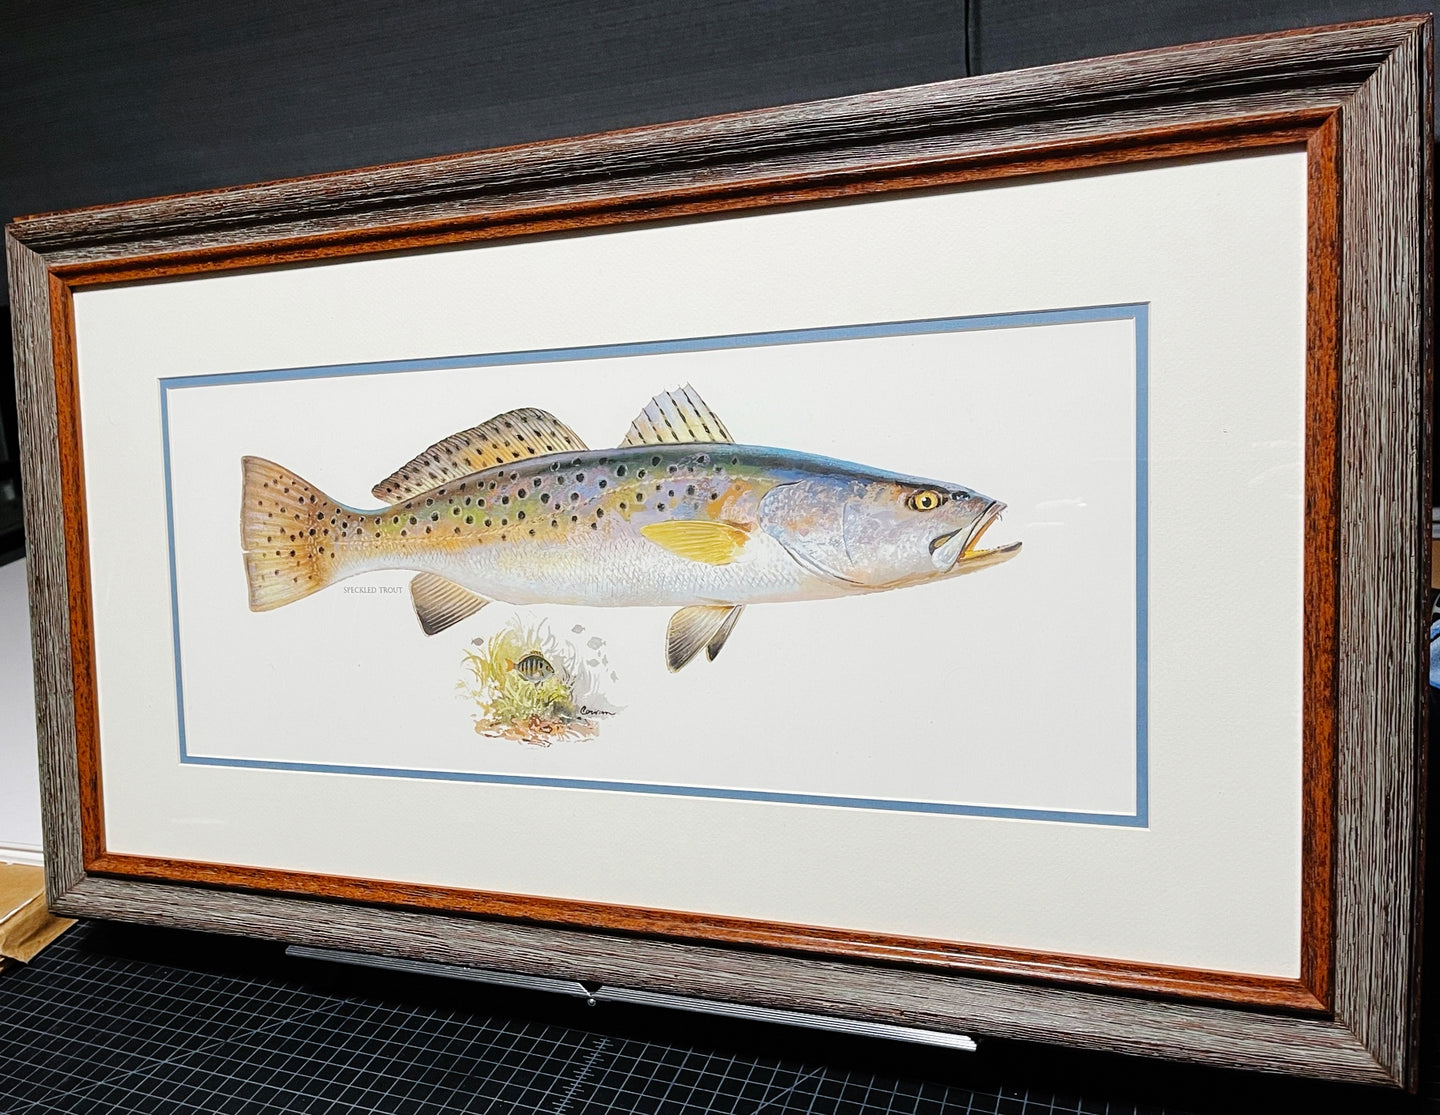 John P. Cowan - Speckled Trout - Texas Treasure Poster Art - Lithograph Quality - Brand New Custom Sporting Frame